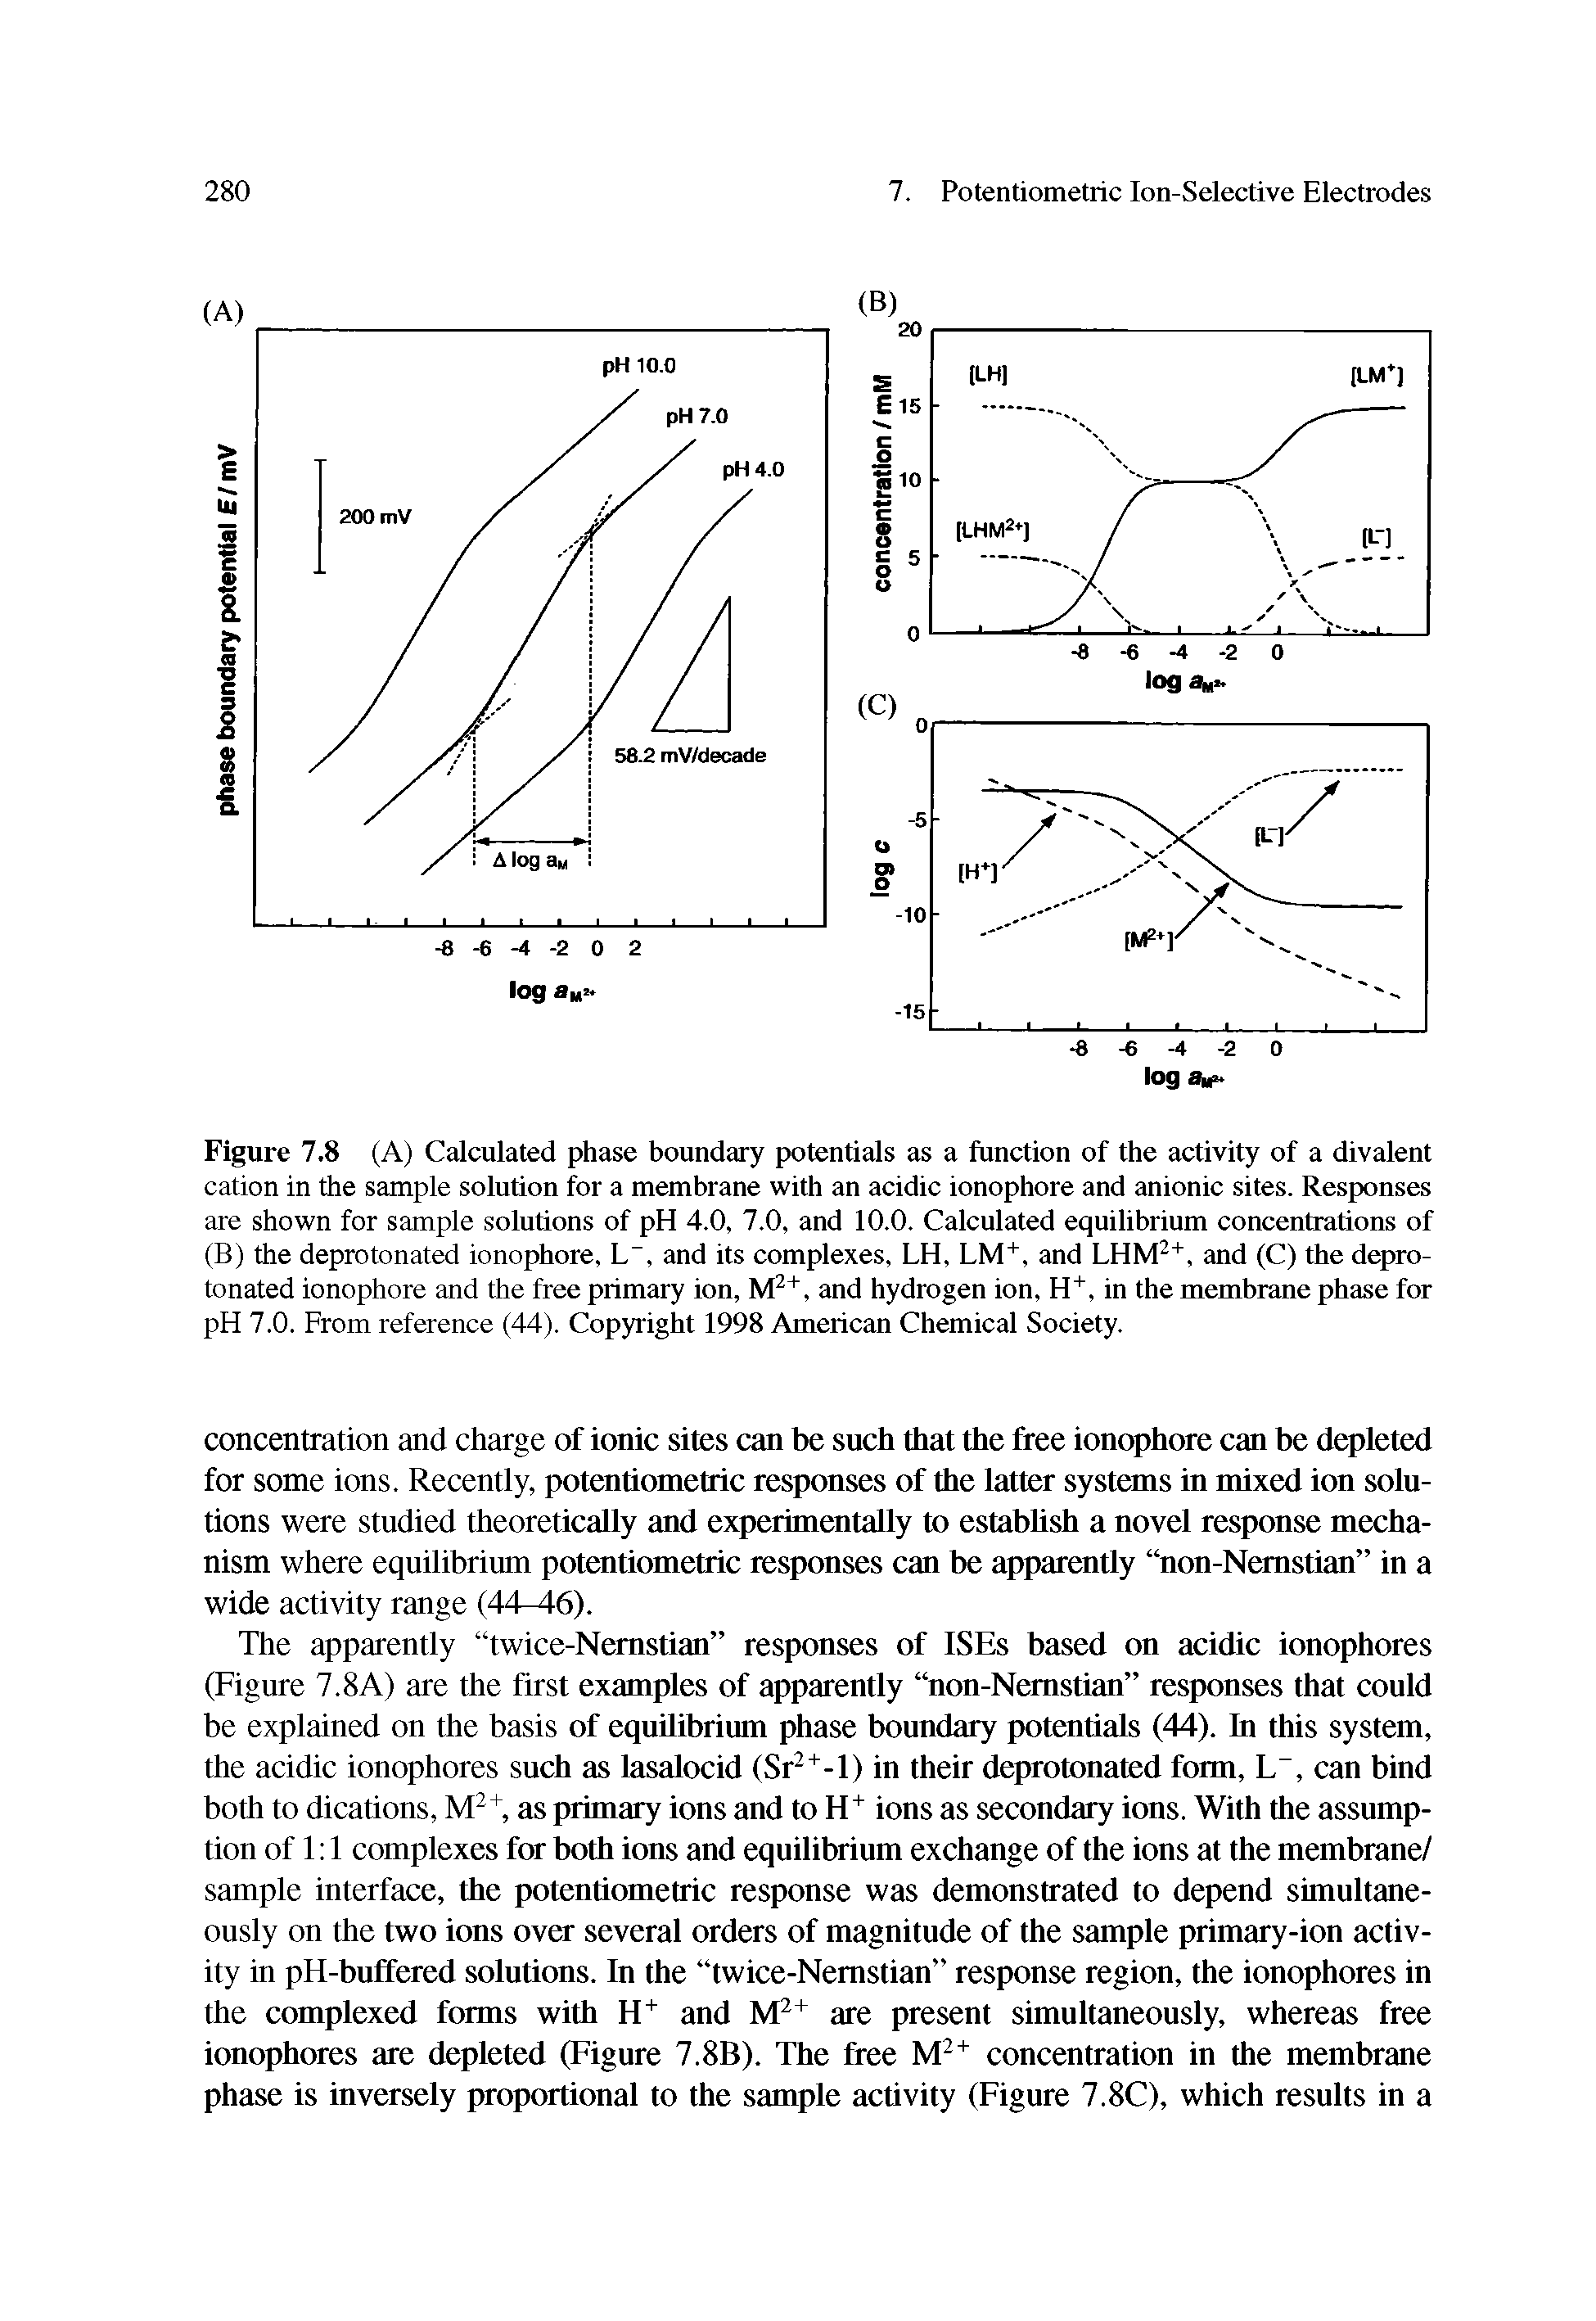 Figure 7.8 (A) Calculated phase boundary potentials as a function of the activity of a divalent cation in the sample solution for a membrane with an acidic ionophore and anionic sites. Responses are shown for sample solutions of pH 4.0, 7.0, and 10.0. Calculated equilibrium concentrations of (B) the deprotonated ionophore, L", and its complexes, LH, LM, and and (C) the depro-...